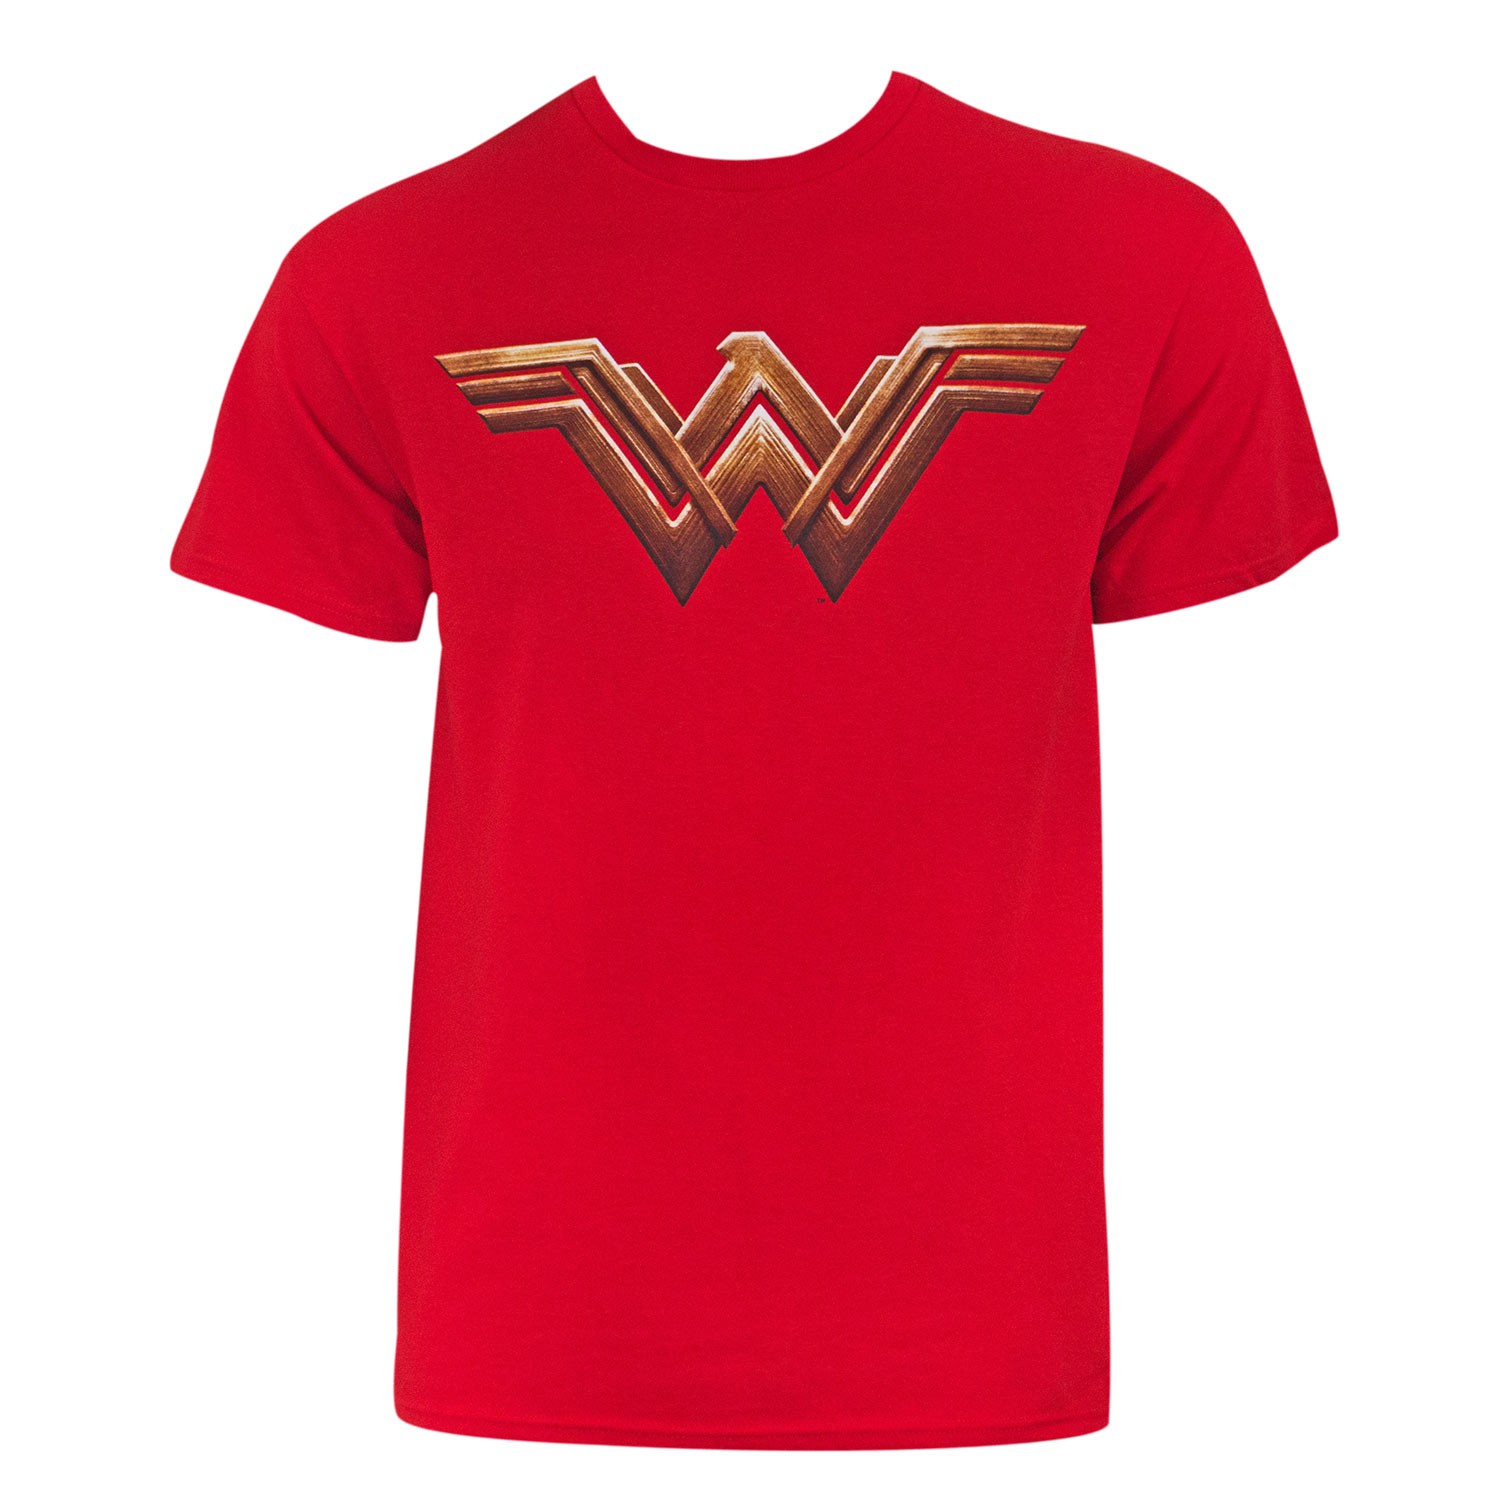 Justice League Wonder Woman Red Tee Shirt